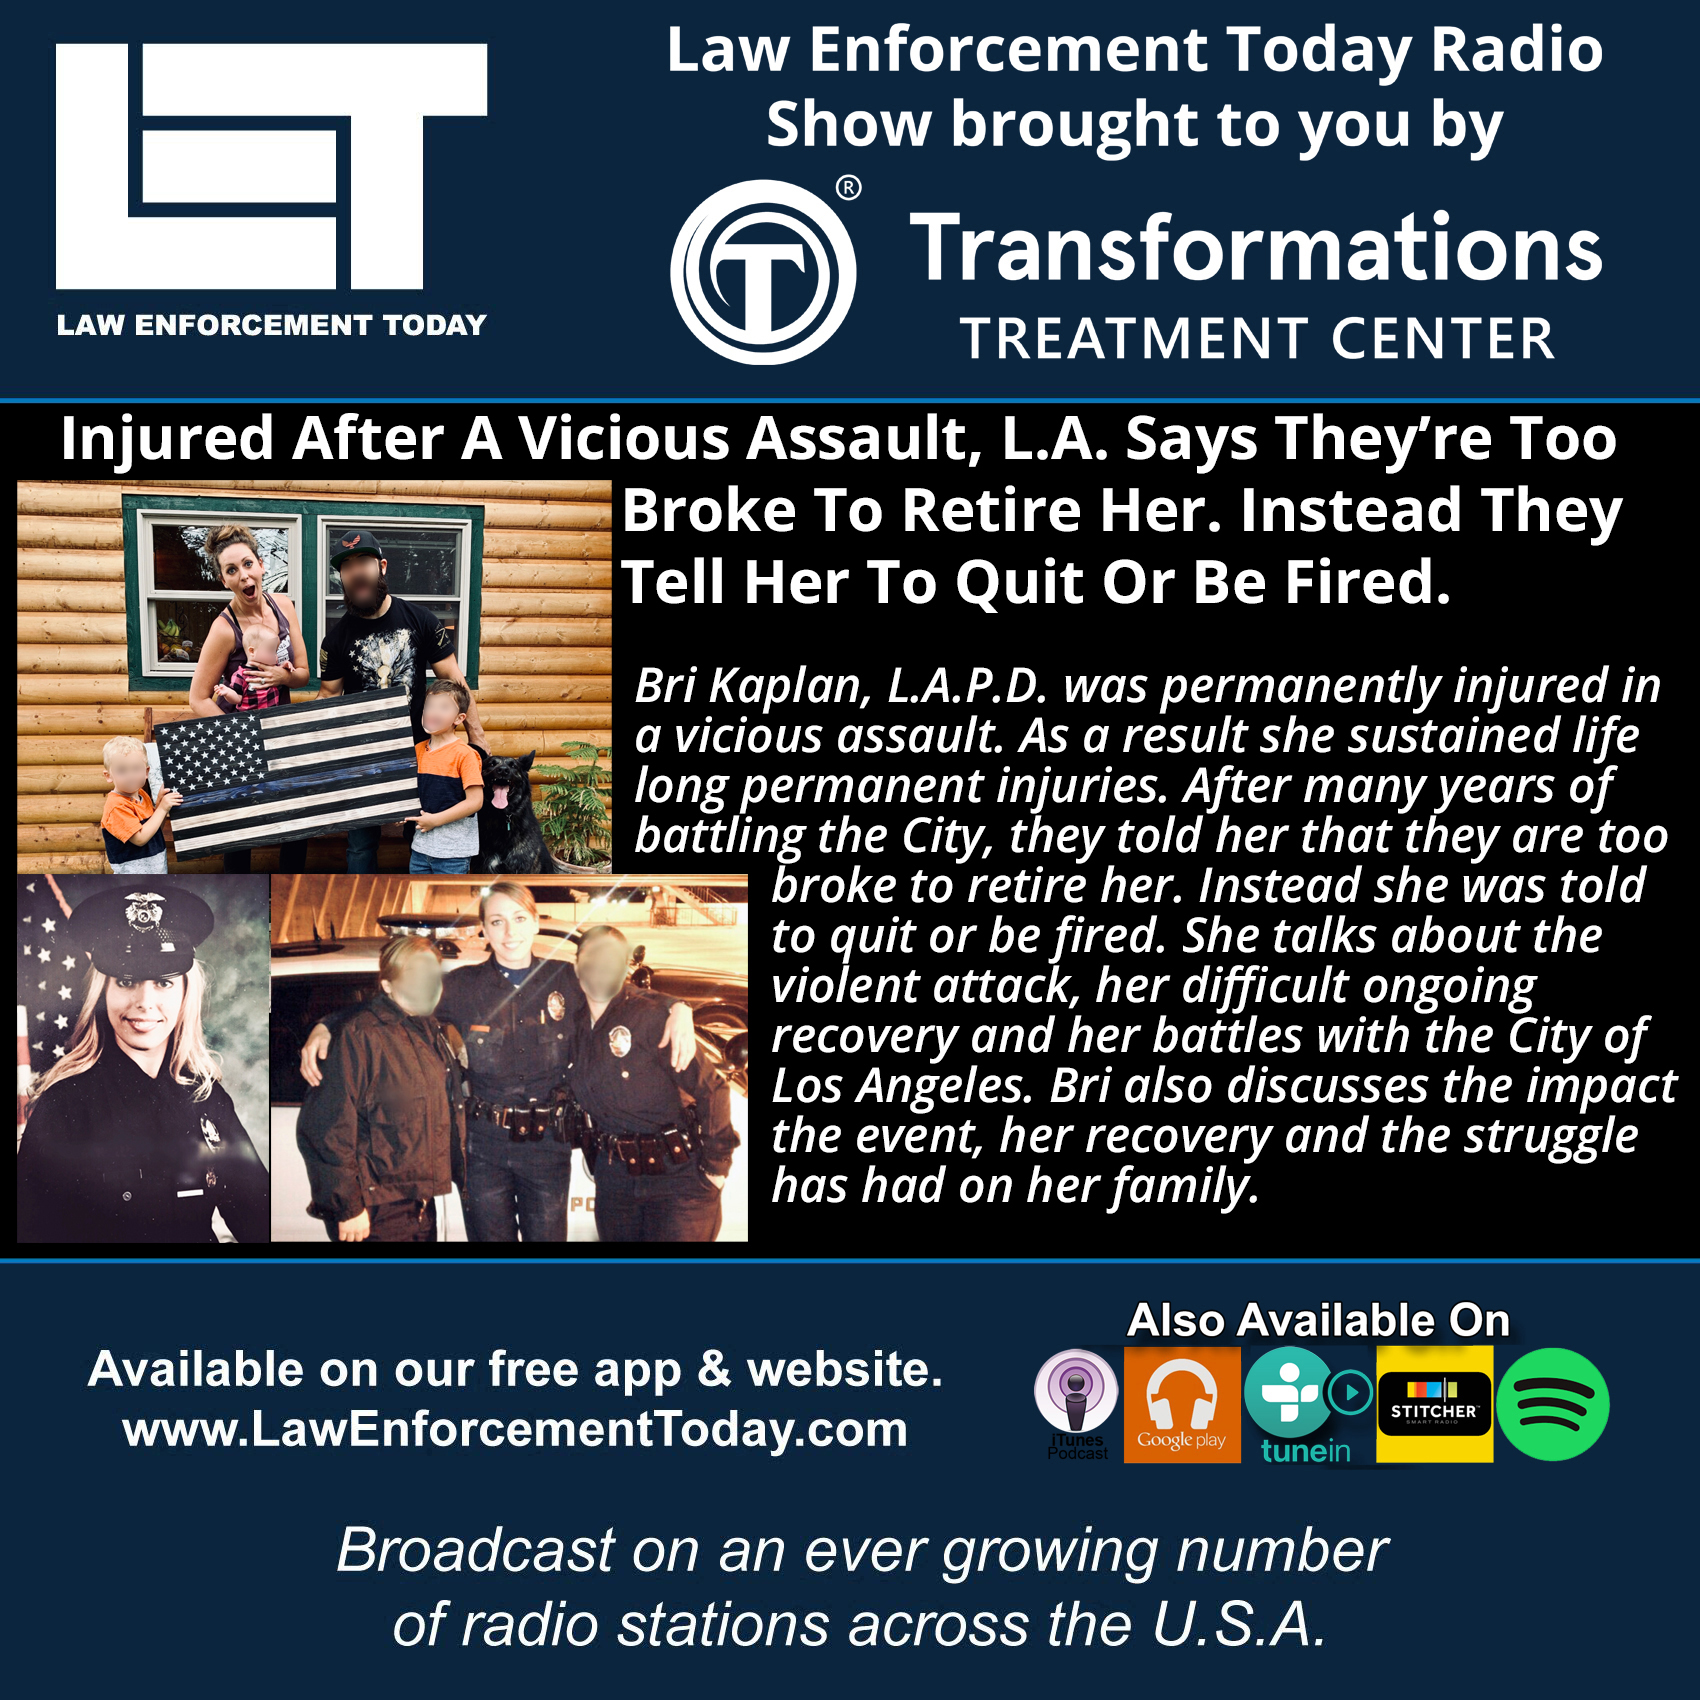 S4E13: Vicious Assault caused Lifelong Injuries, City Says They're Too Broke To Retire Her.